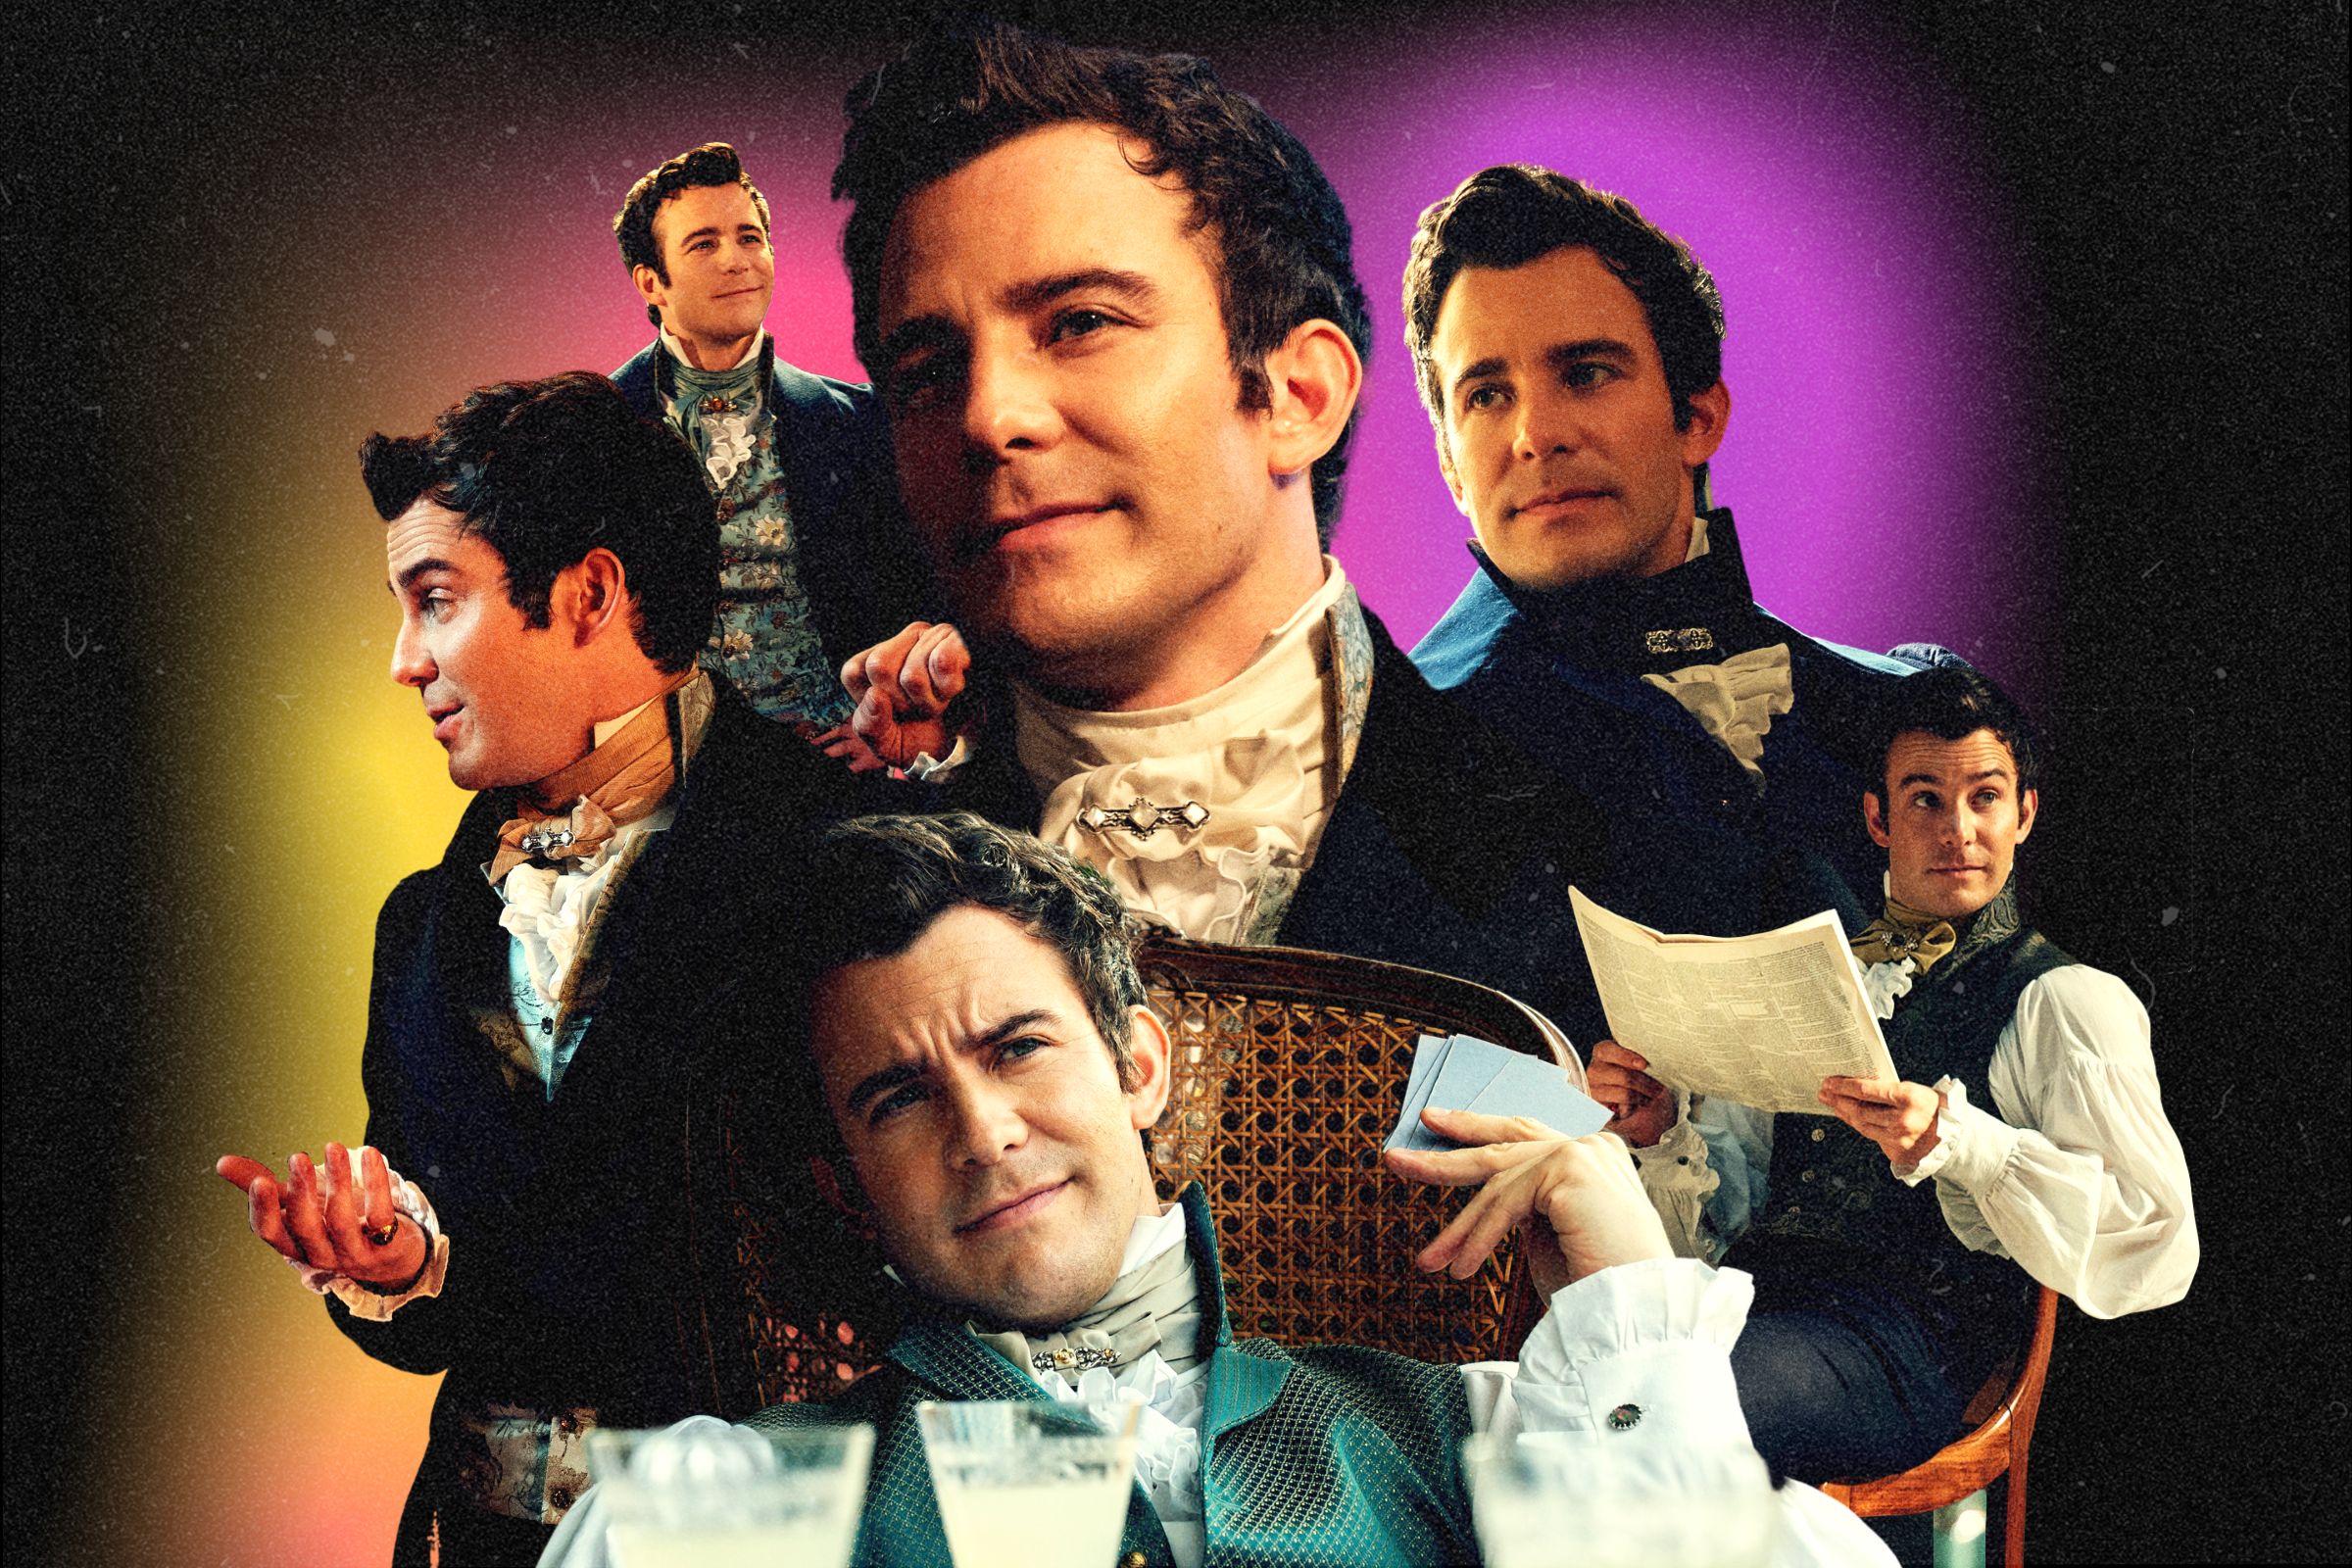 A collage of images of Benedict Bridgerton from the show Bridgerton